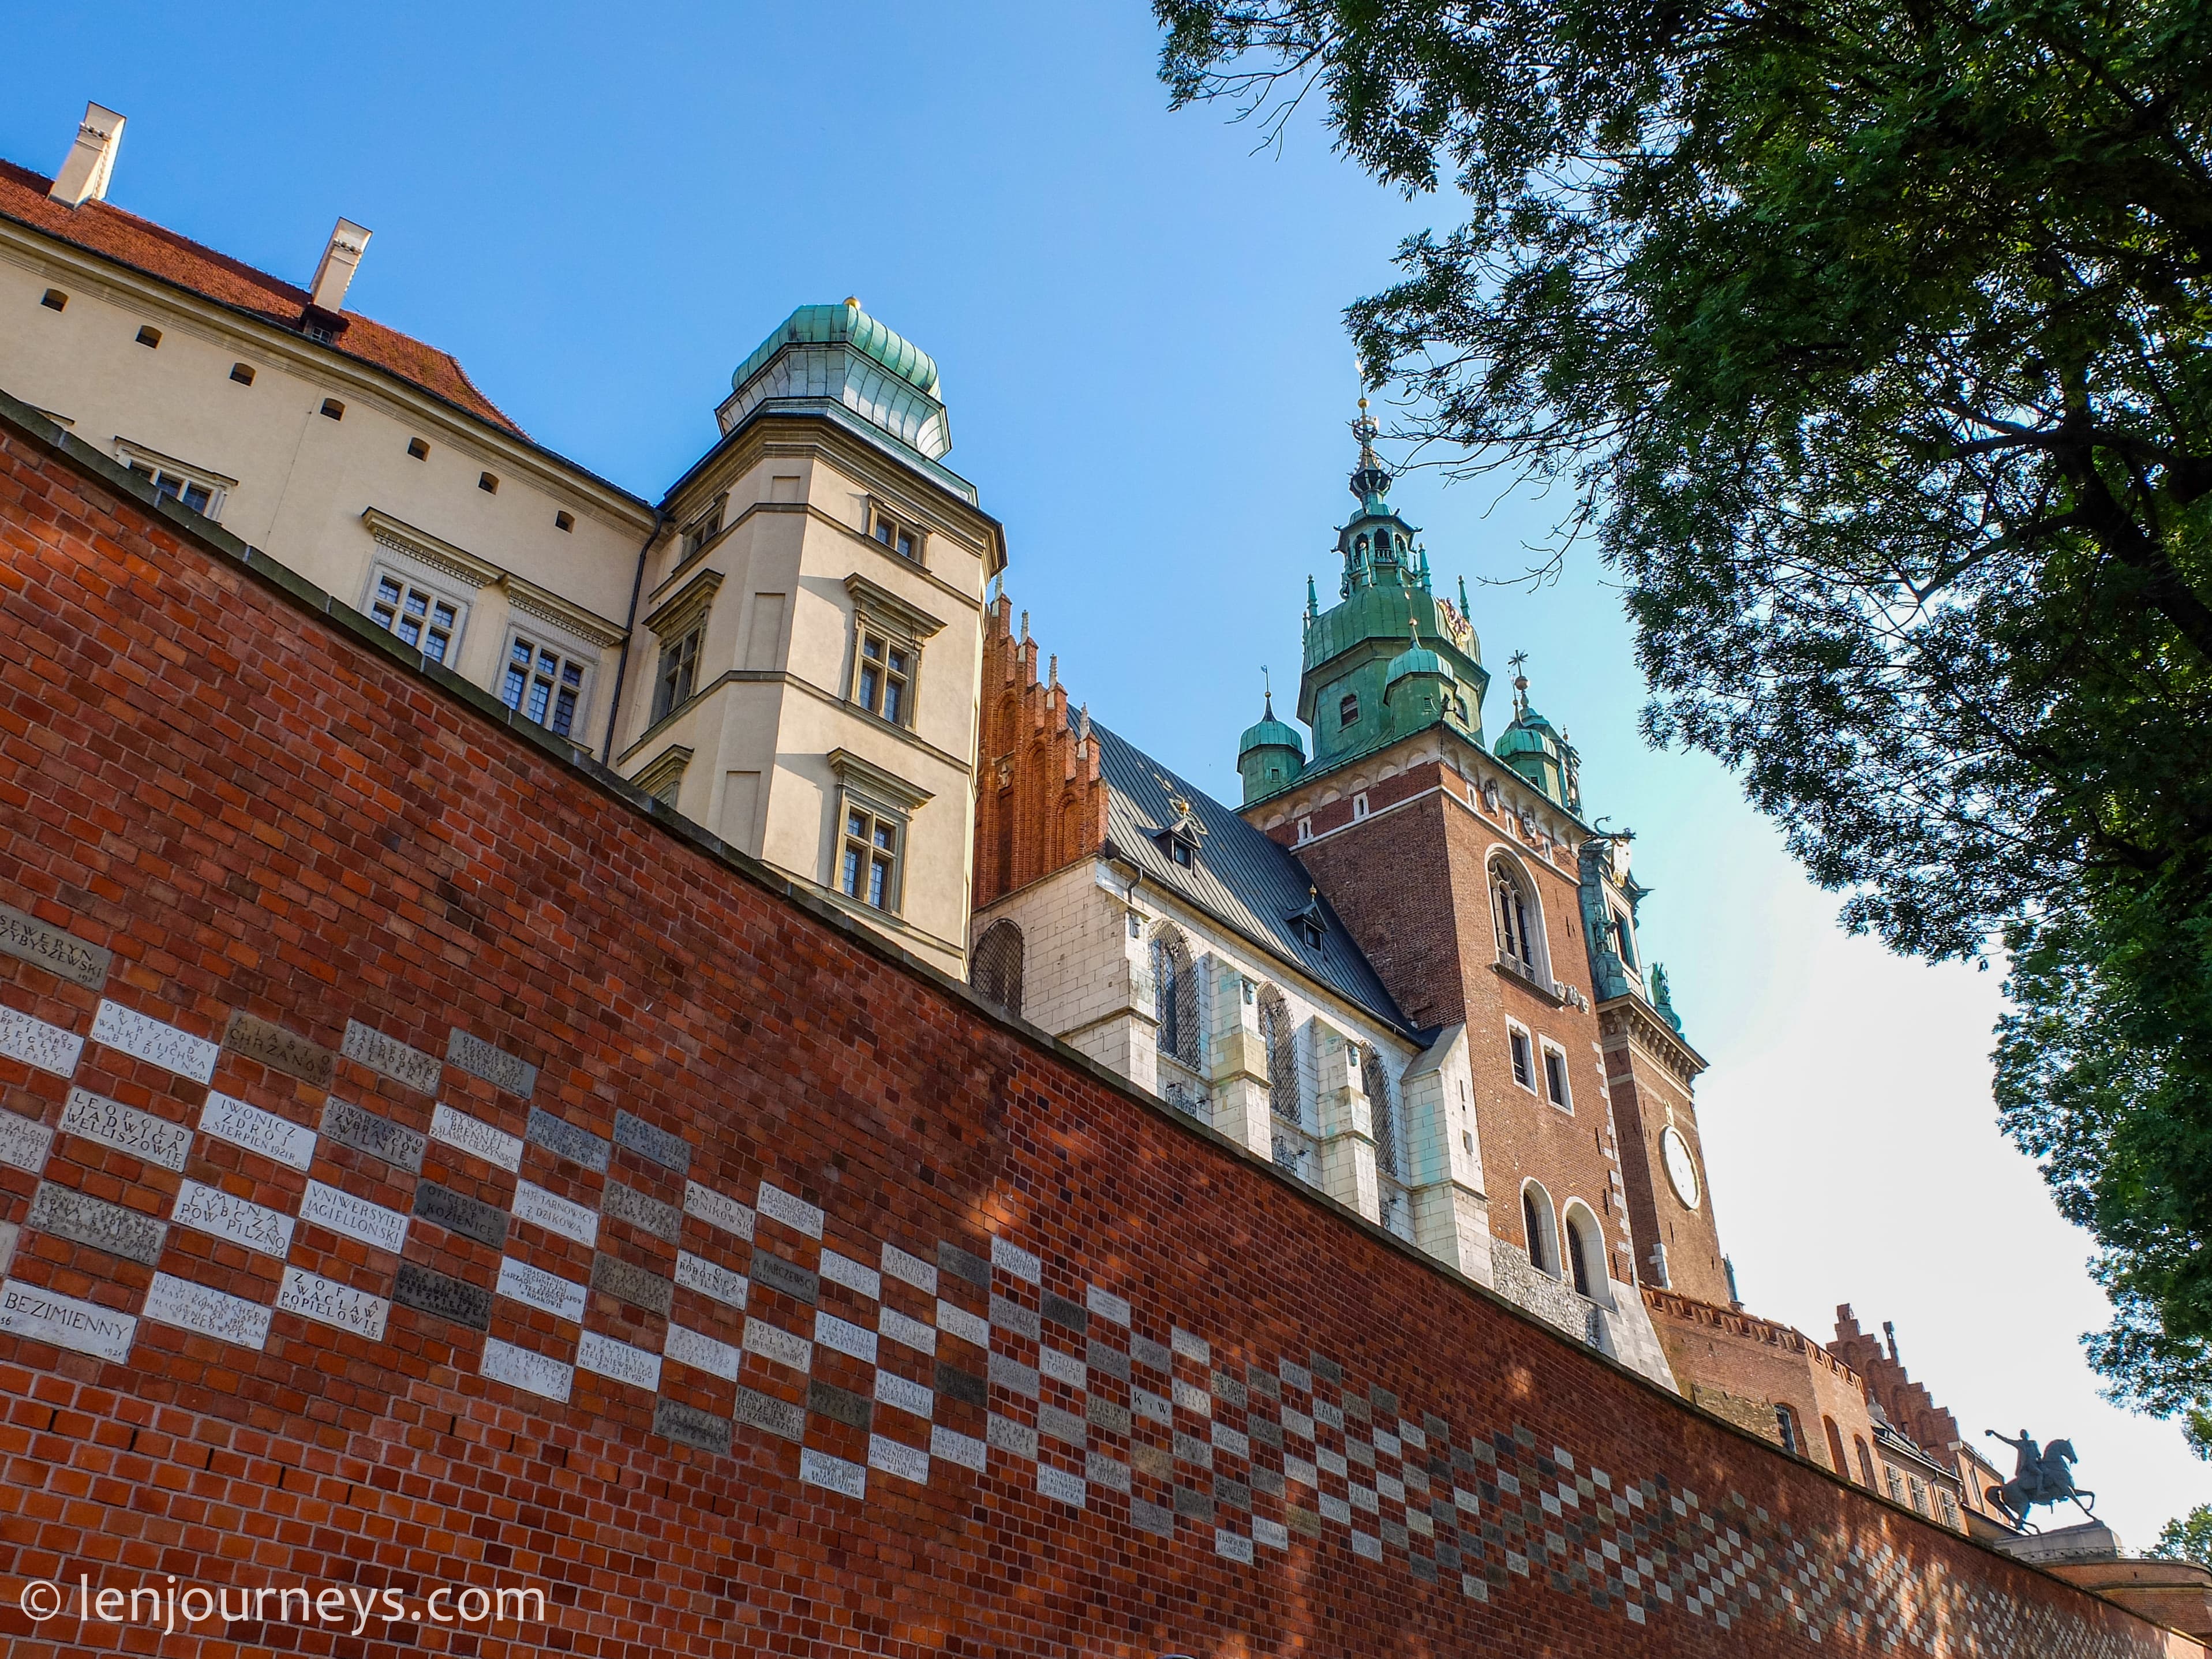 The wall of Wawel Castle, Cracow